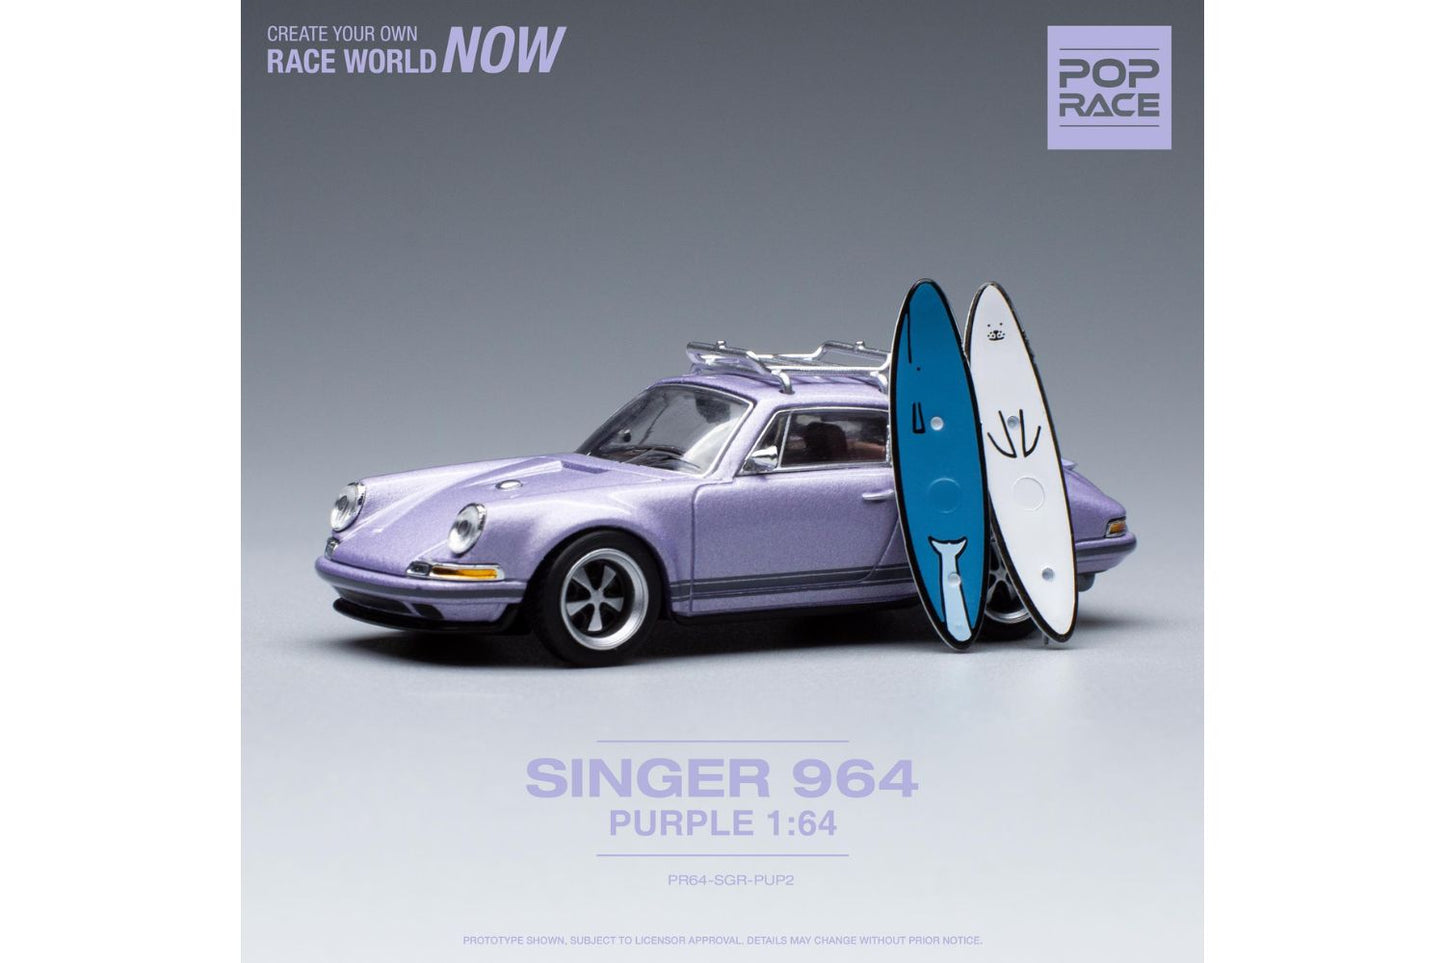 Pop Race 1/64 Singer Porsche 911 (964) in Purple with Roof Rack and Surf Boards